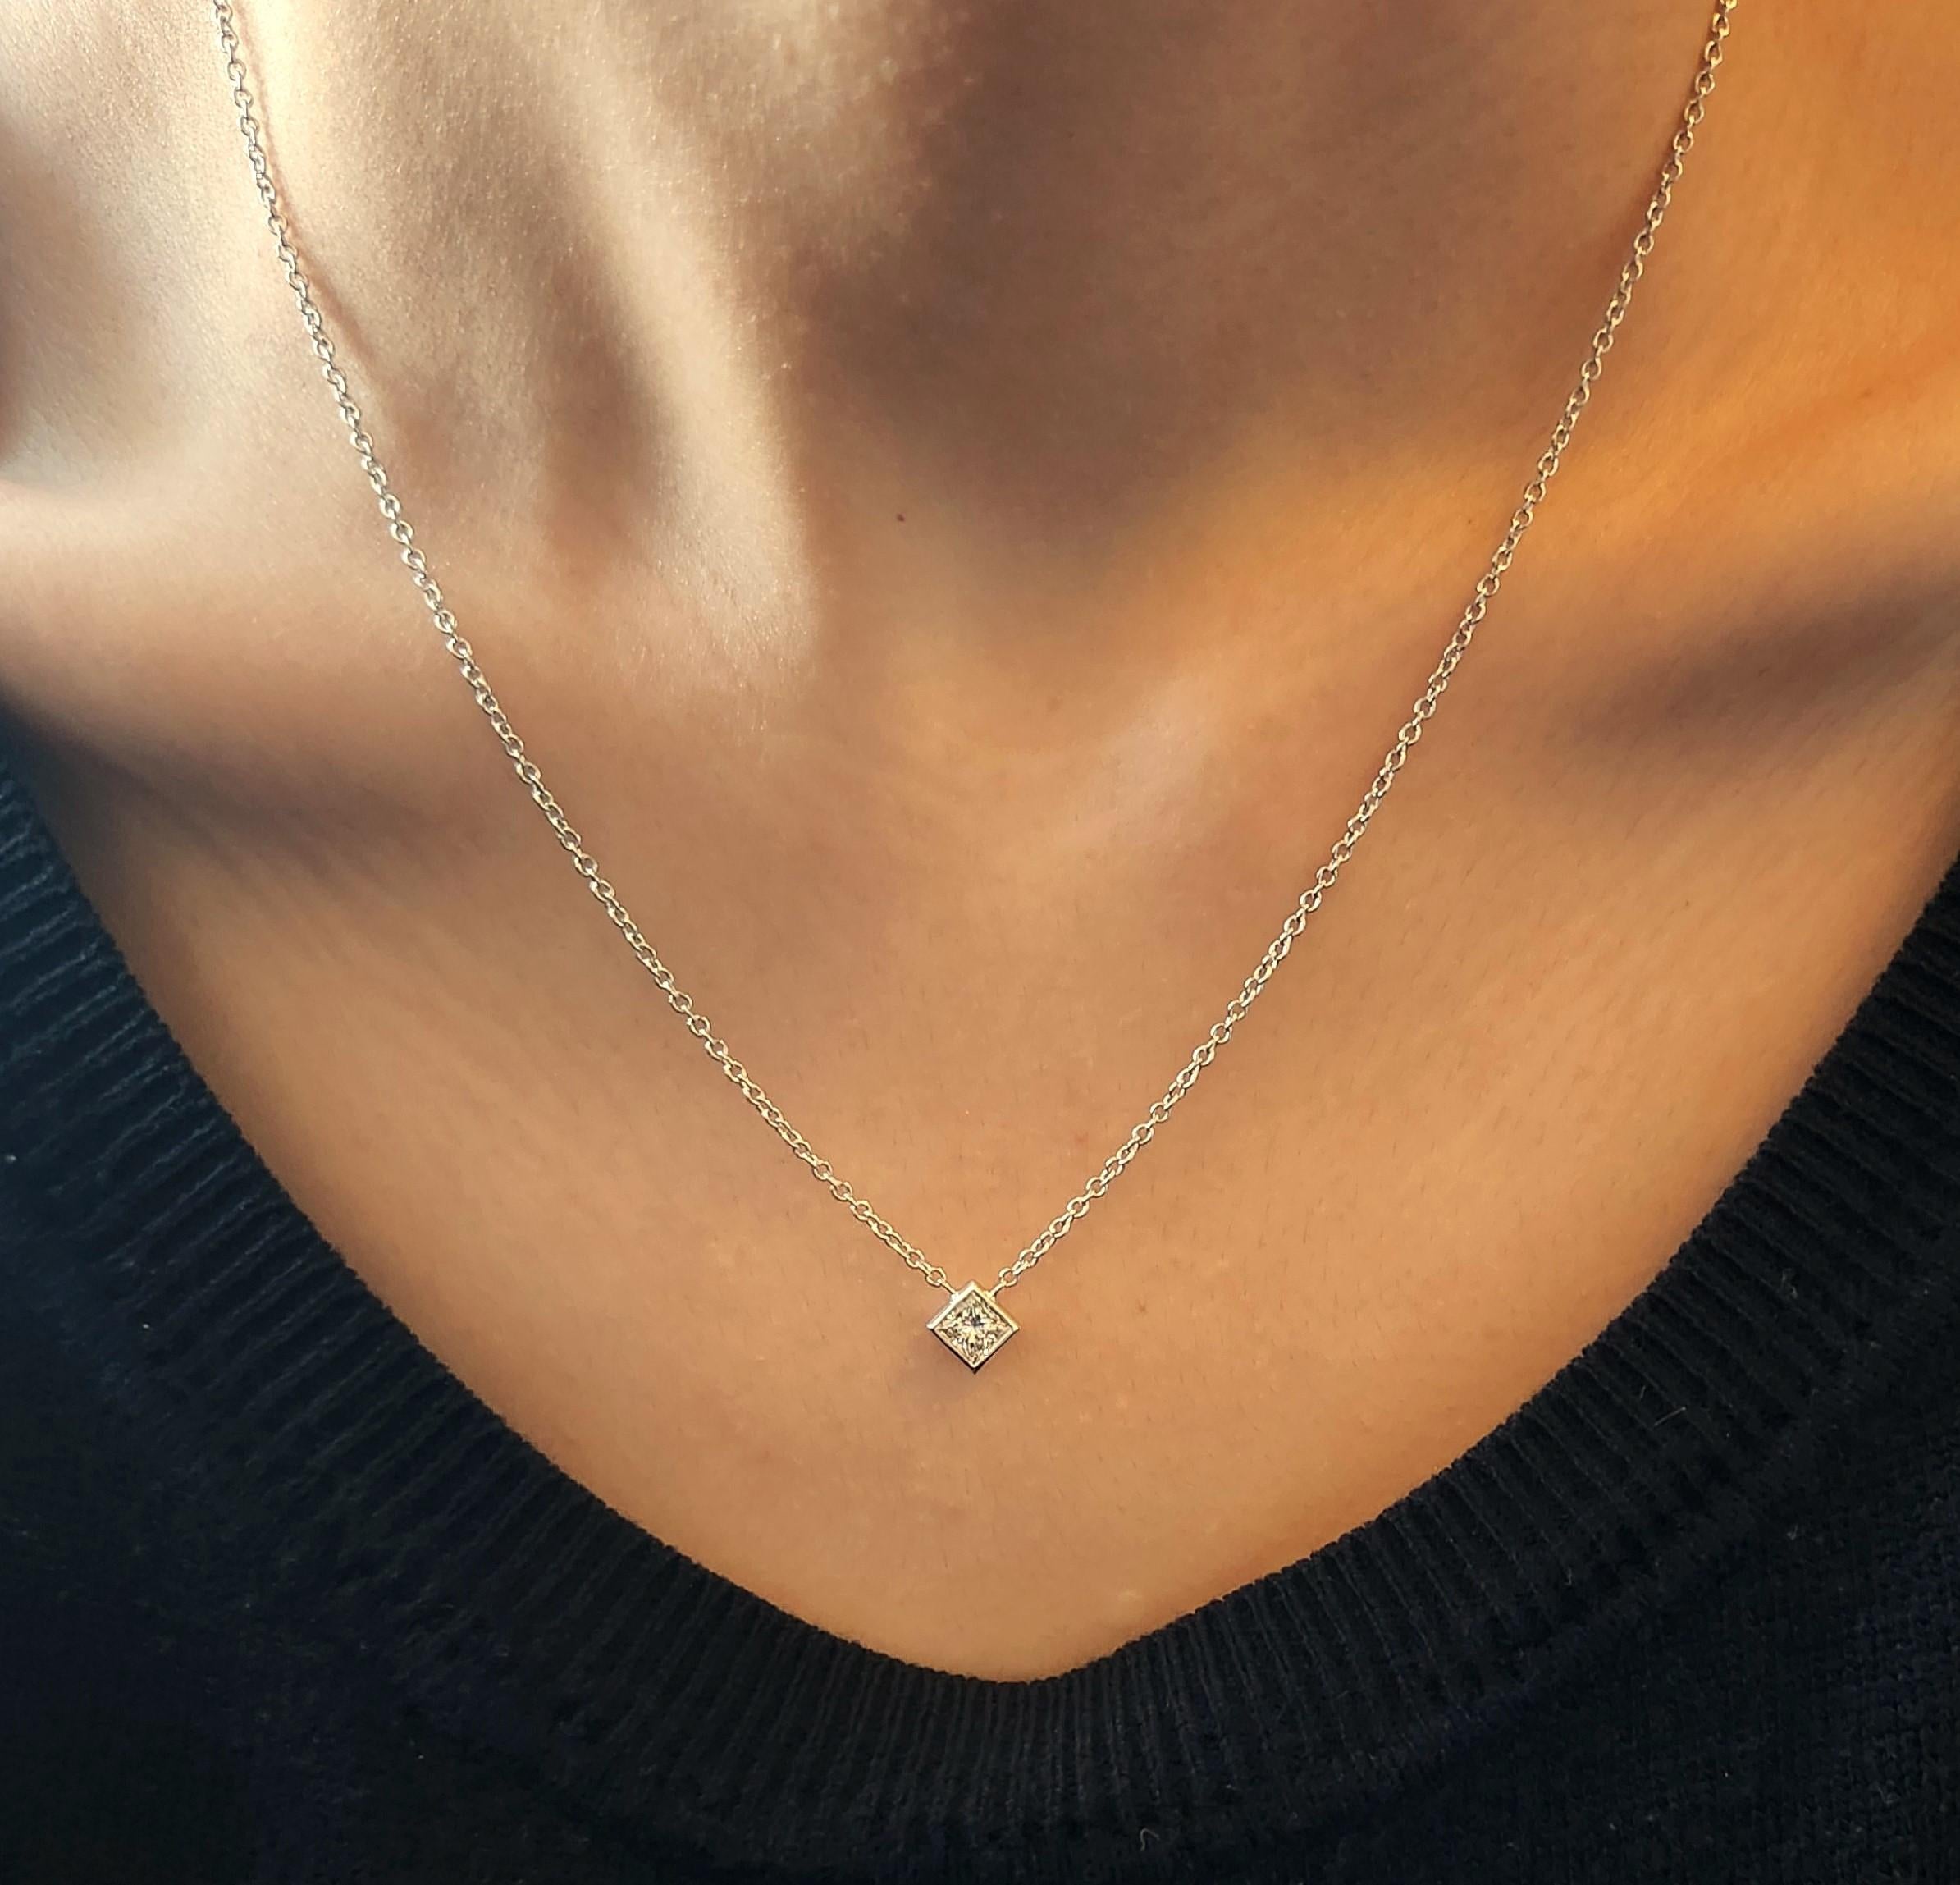 14K White Gold handmade bezel setting with a beautiful .72CT white Princess cut diamond. The heavy bezel is permanently attached to the 14K white gold cable chain and a Lobster clasp. The chain has a loop at 18